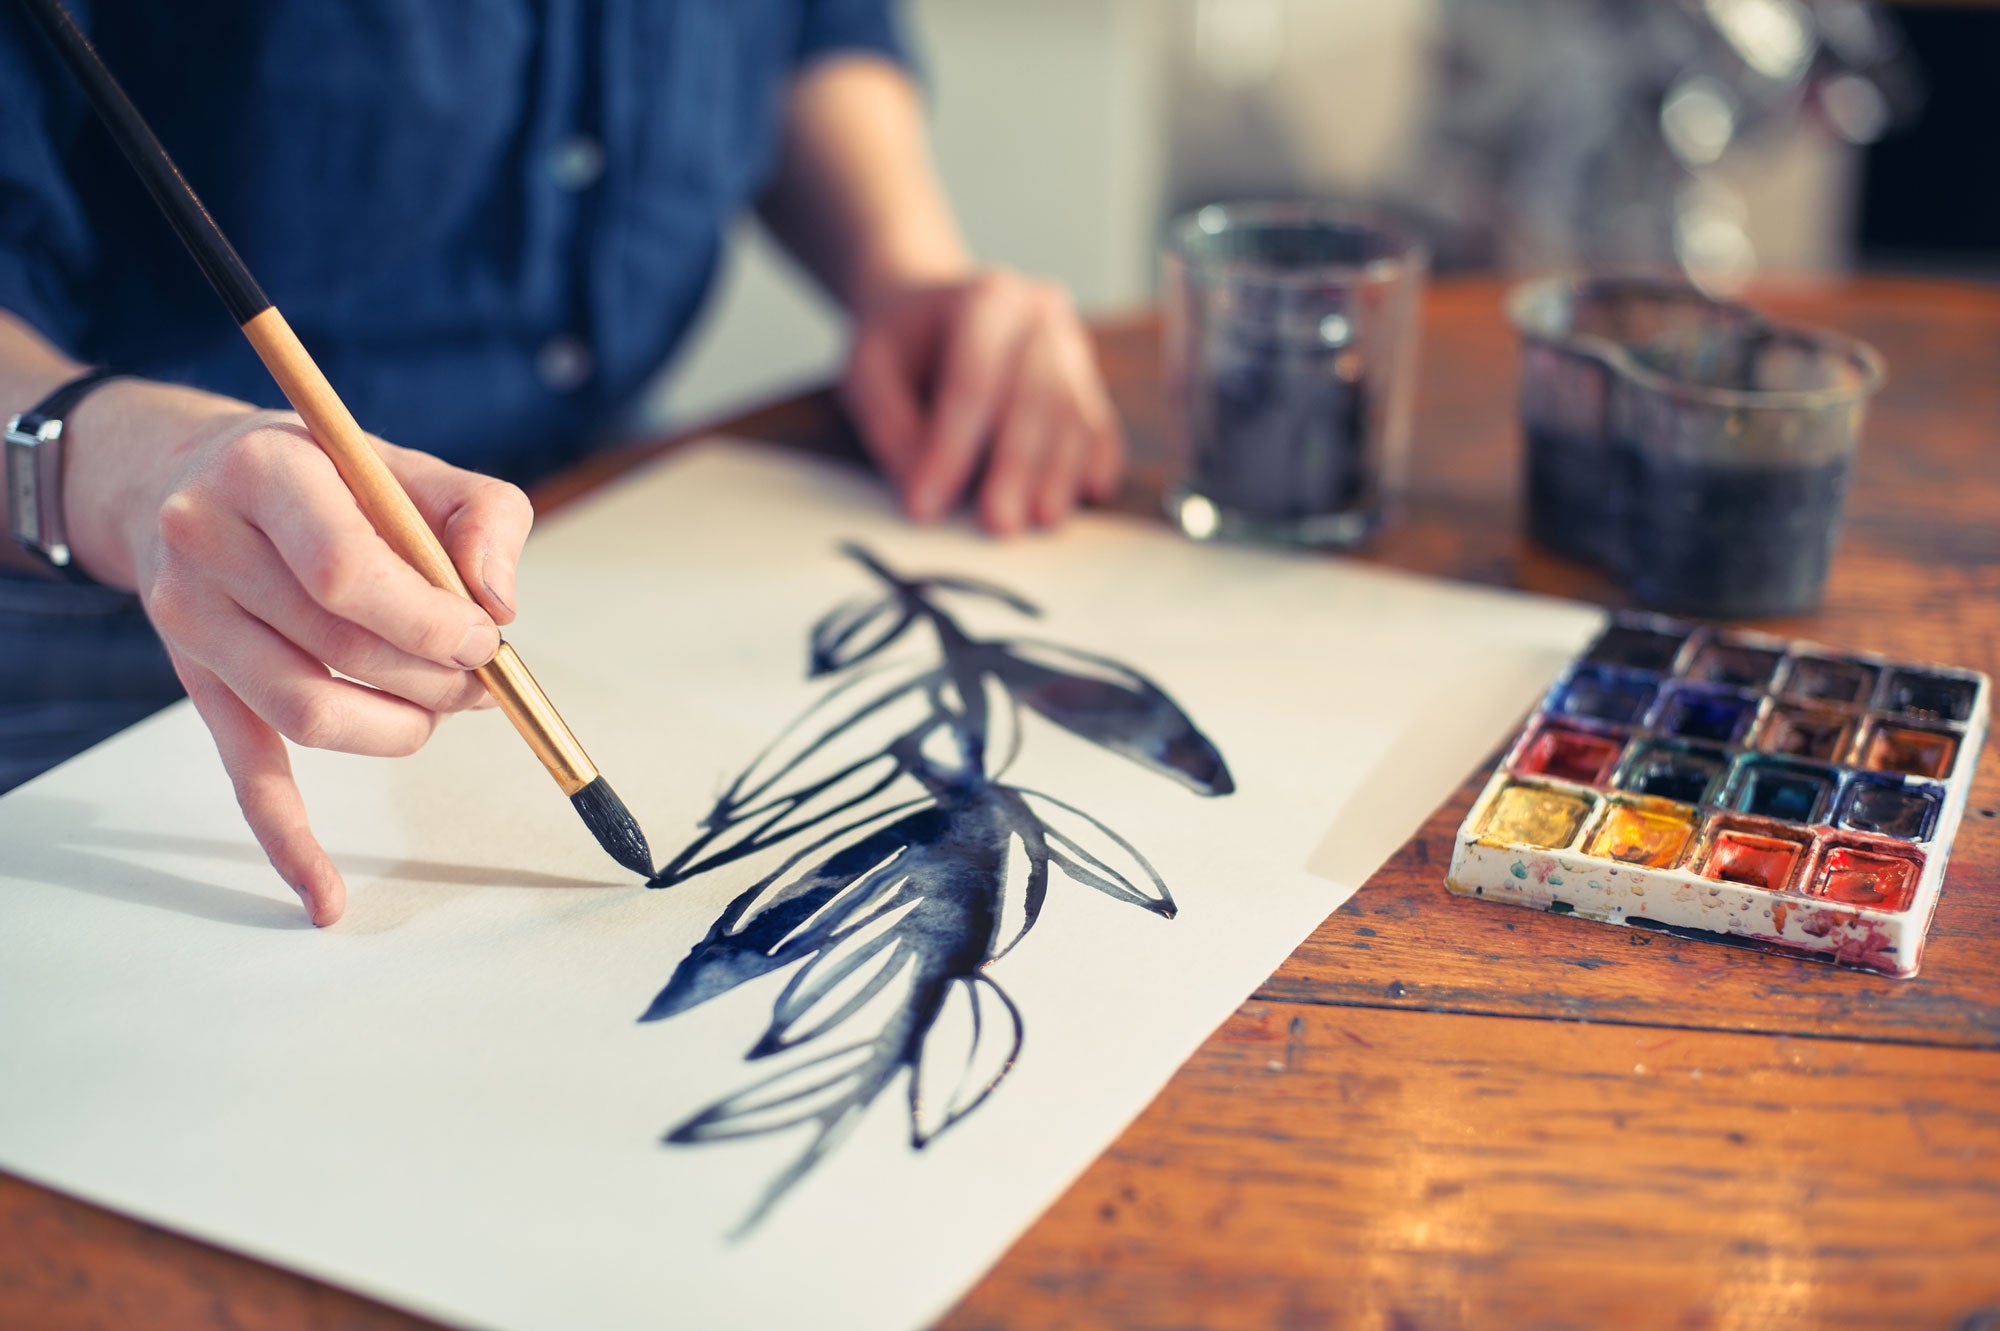 Online Course in DIGITAL Illustration: Alternatives to become a PROFESSIONAL Illustrator.